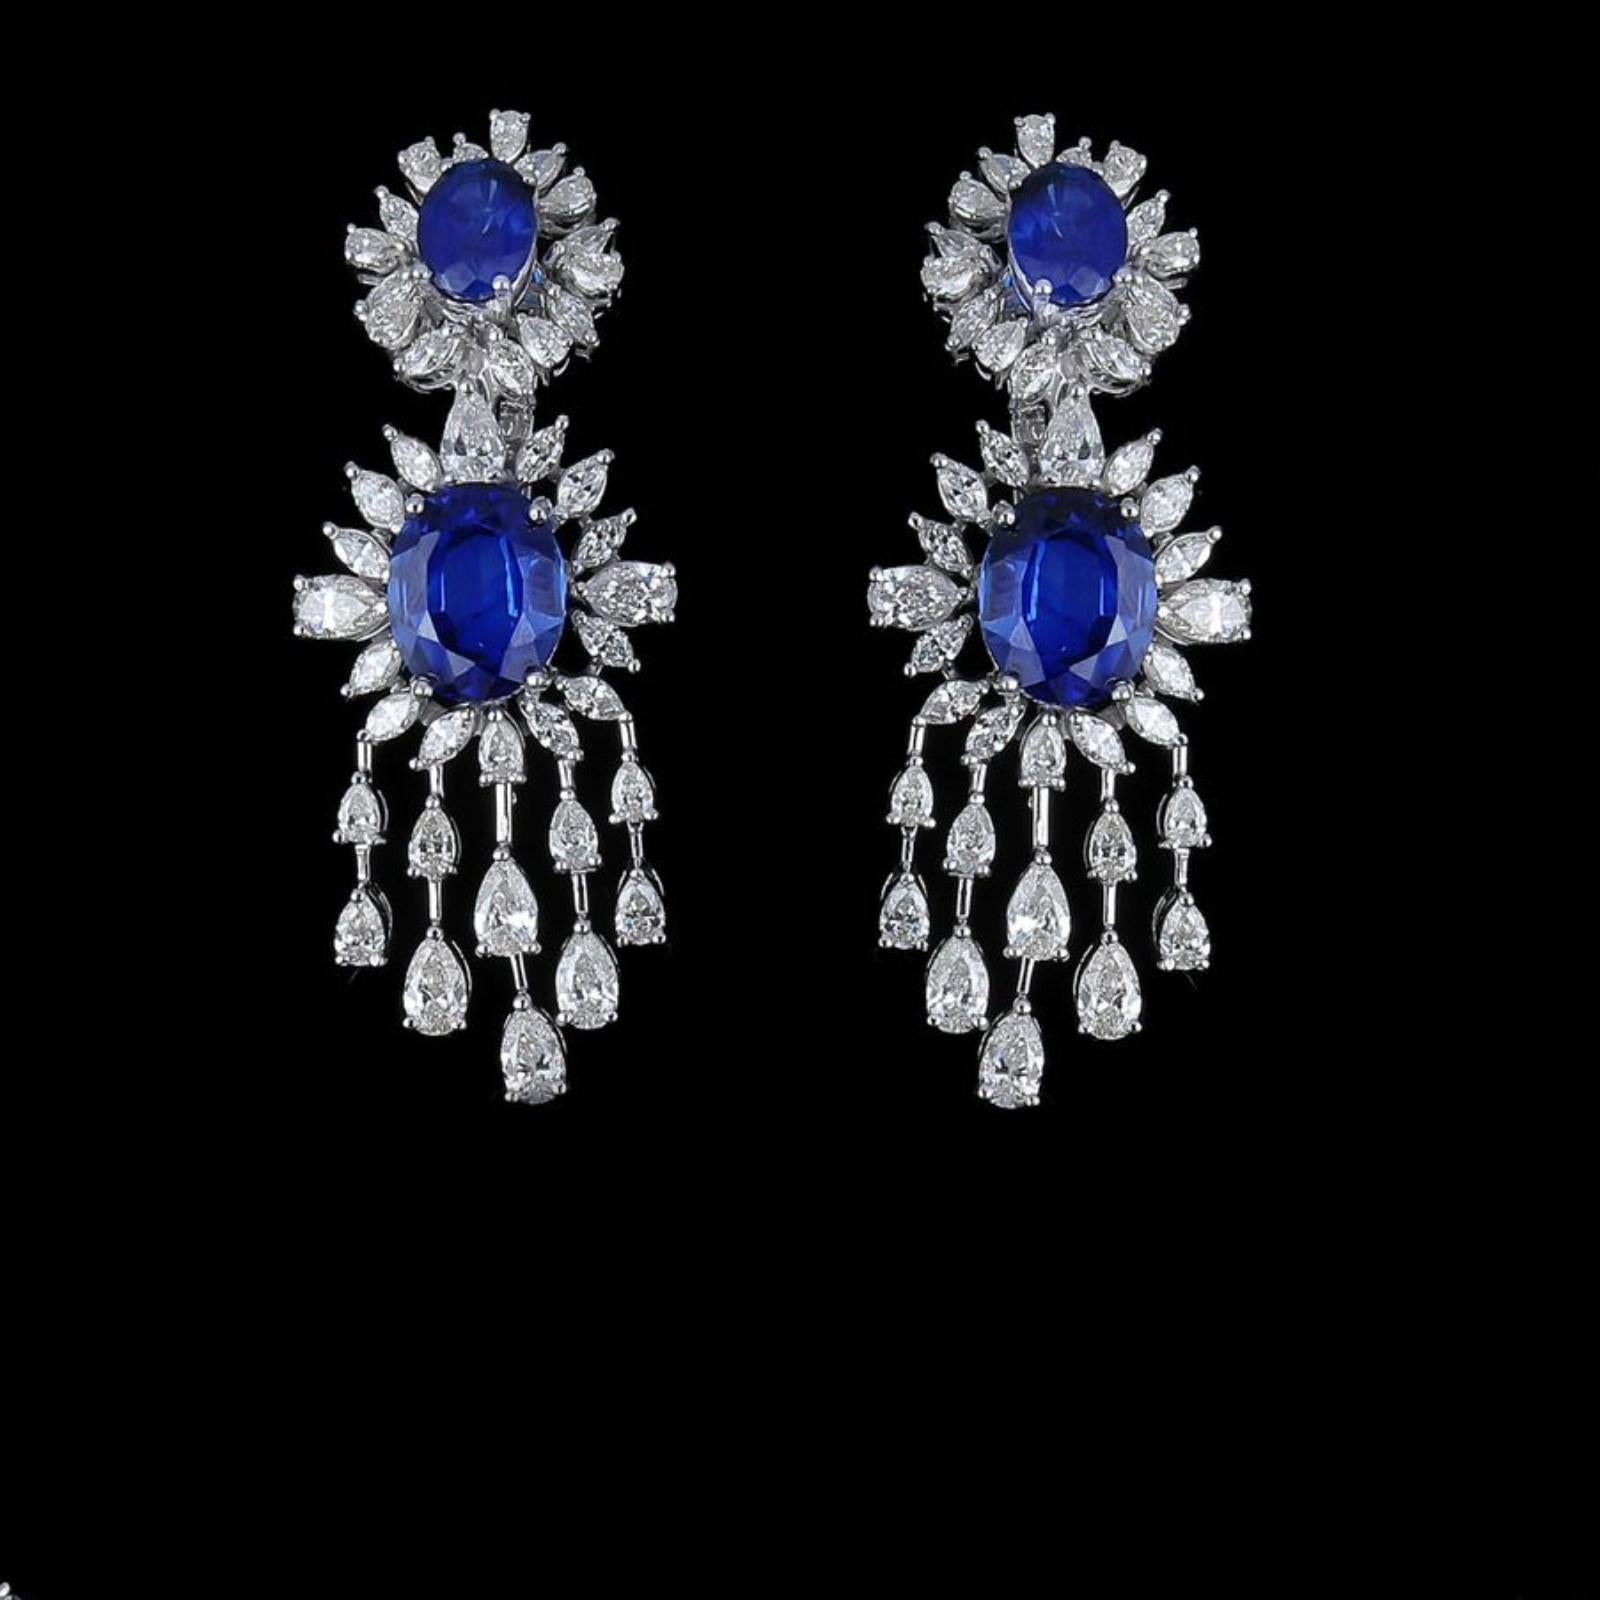 The Following Items we are offering is a Rare Important Spectacular and Brilliant White Gold Large Gorgeous Fancy Blue Sapphire Diamond Draped Dangle Earrings. Earrings consists of Rare Fine Magnificent Glittering Blue Sapphires and Gorgeous